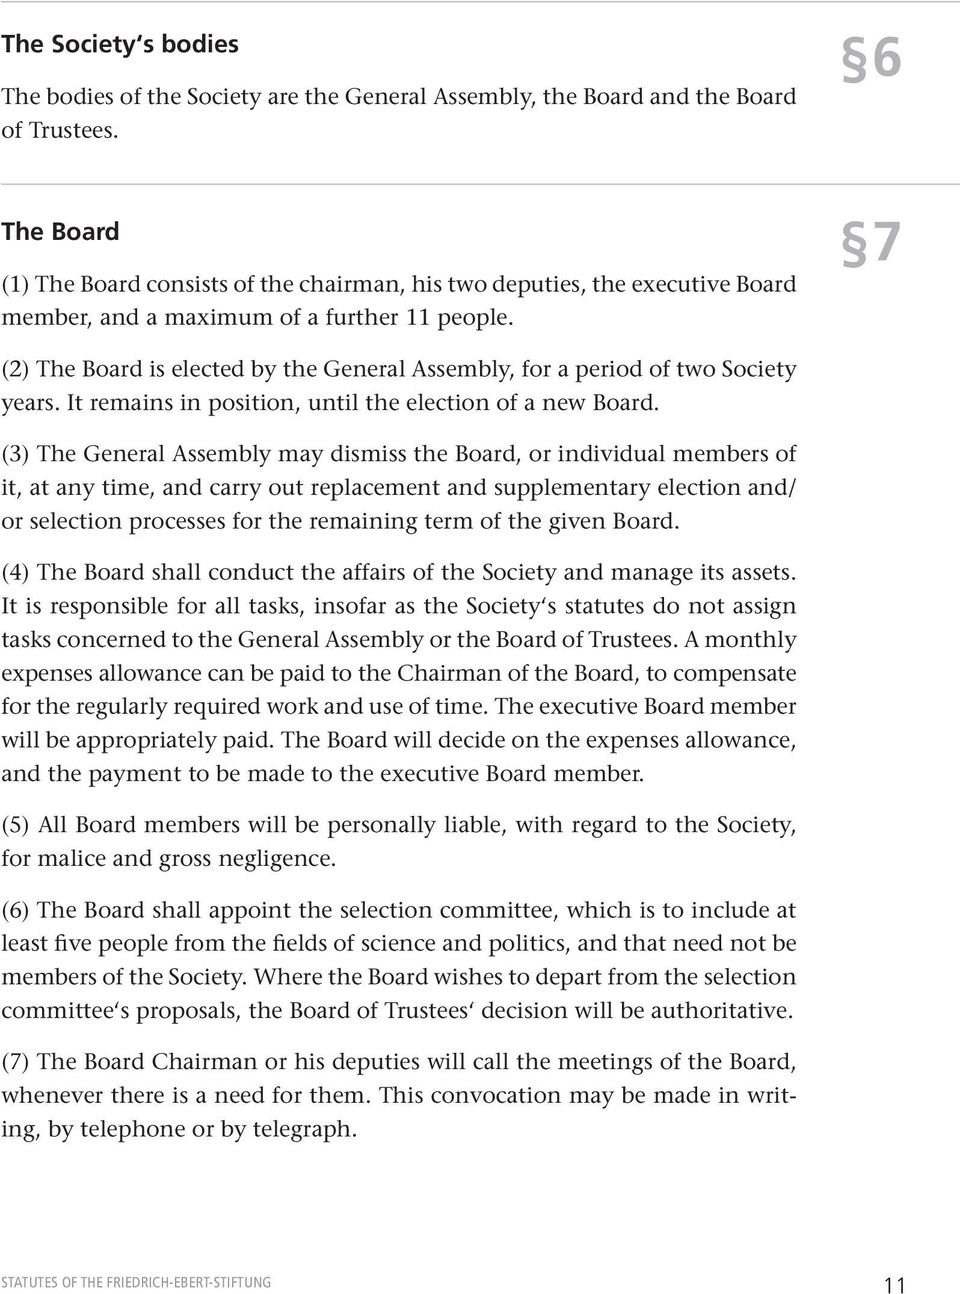 7 (2) The Board is elected by the General Assembly, for a period of two Society years. It remains in position, until the election of a new Board.